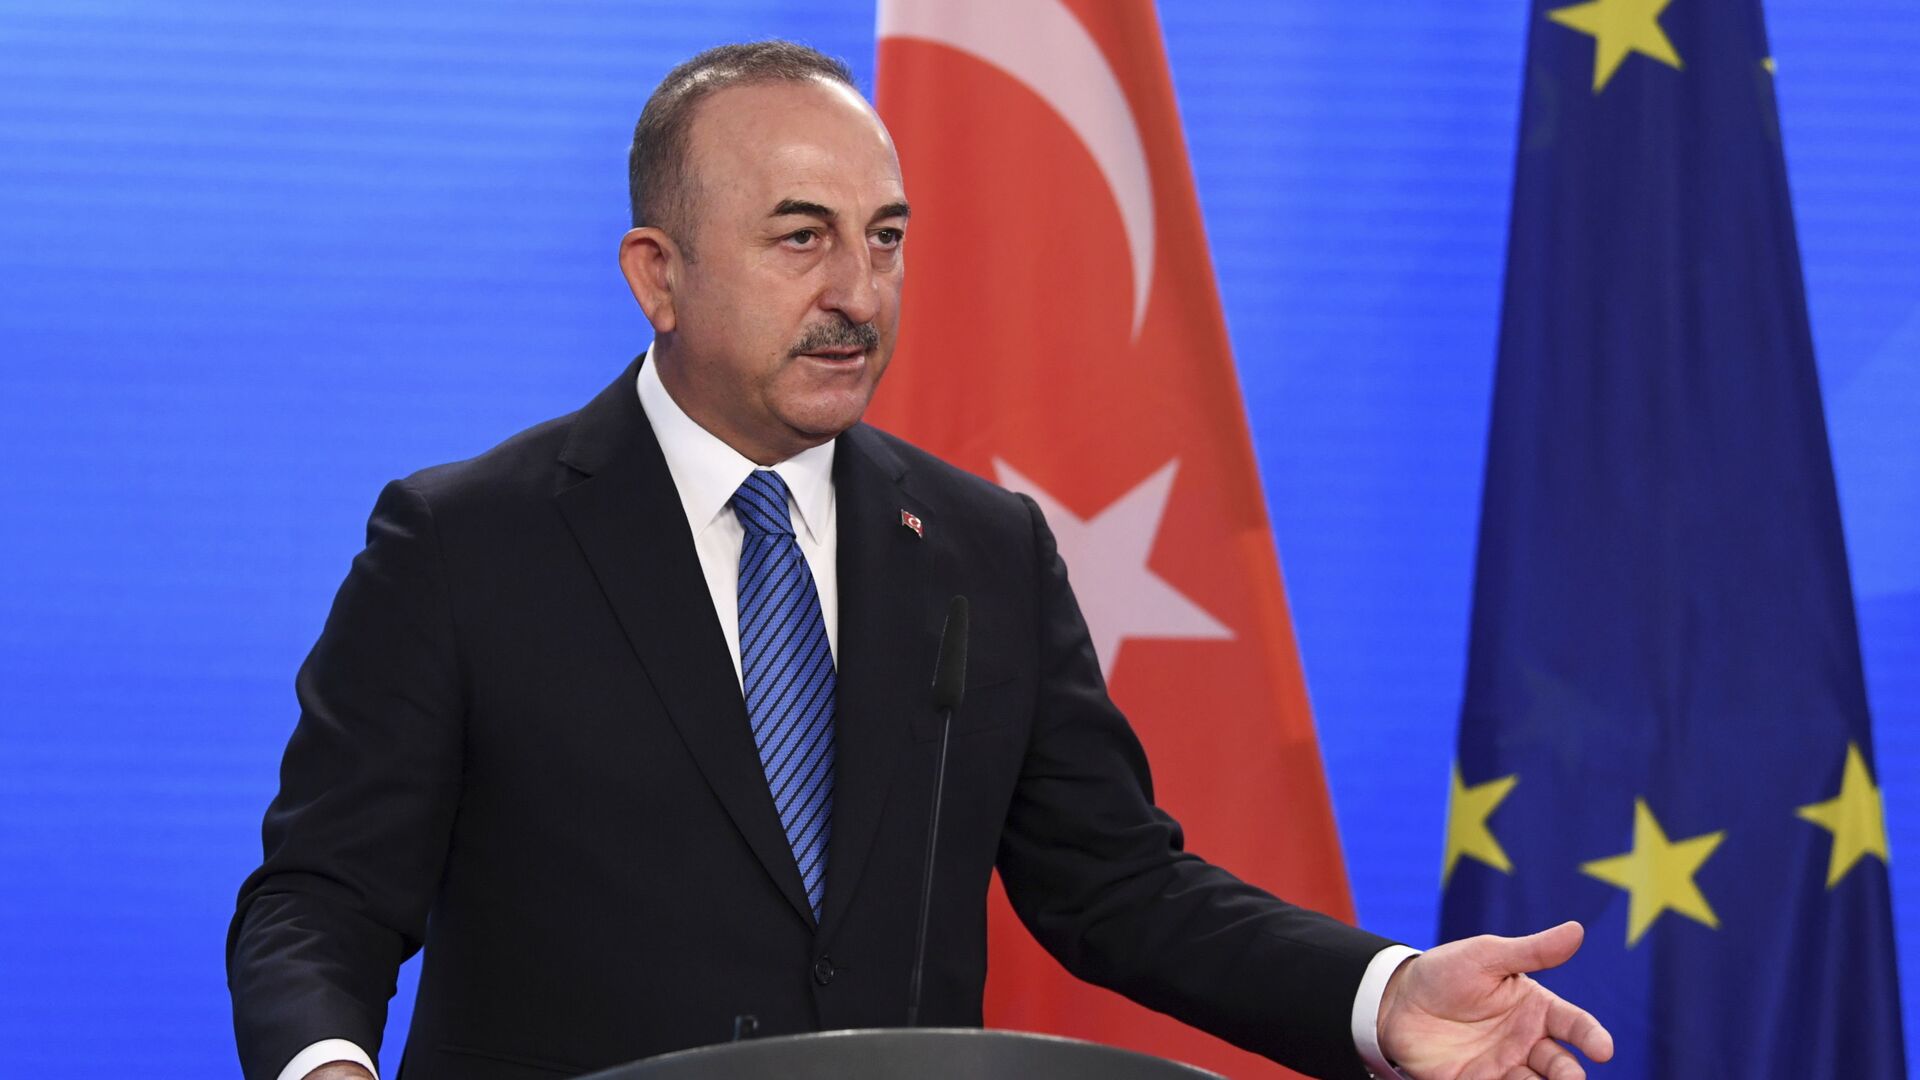 Mevlud Çavuşoğlu discussed the situation in Ukraine with the Secretary General of NATO